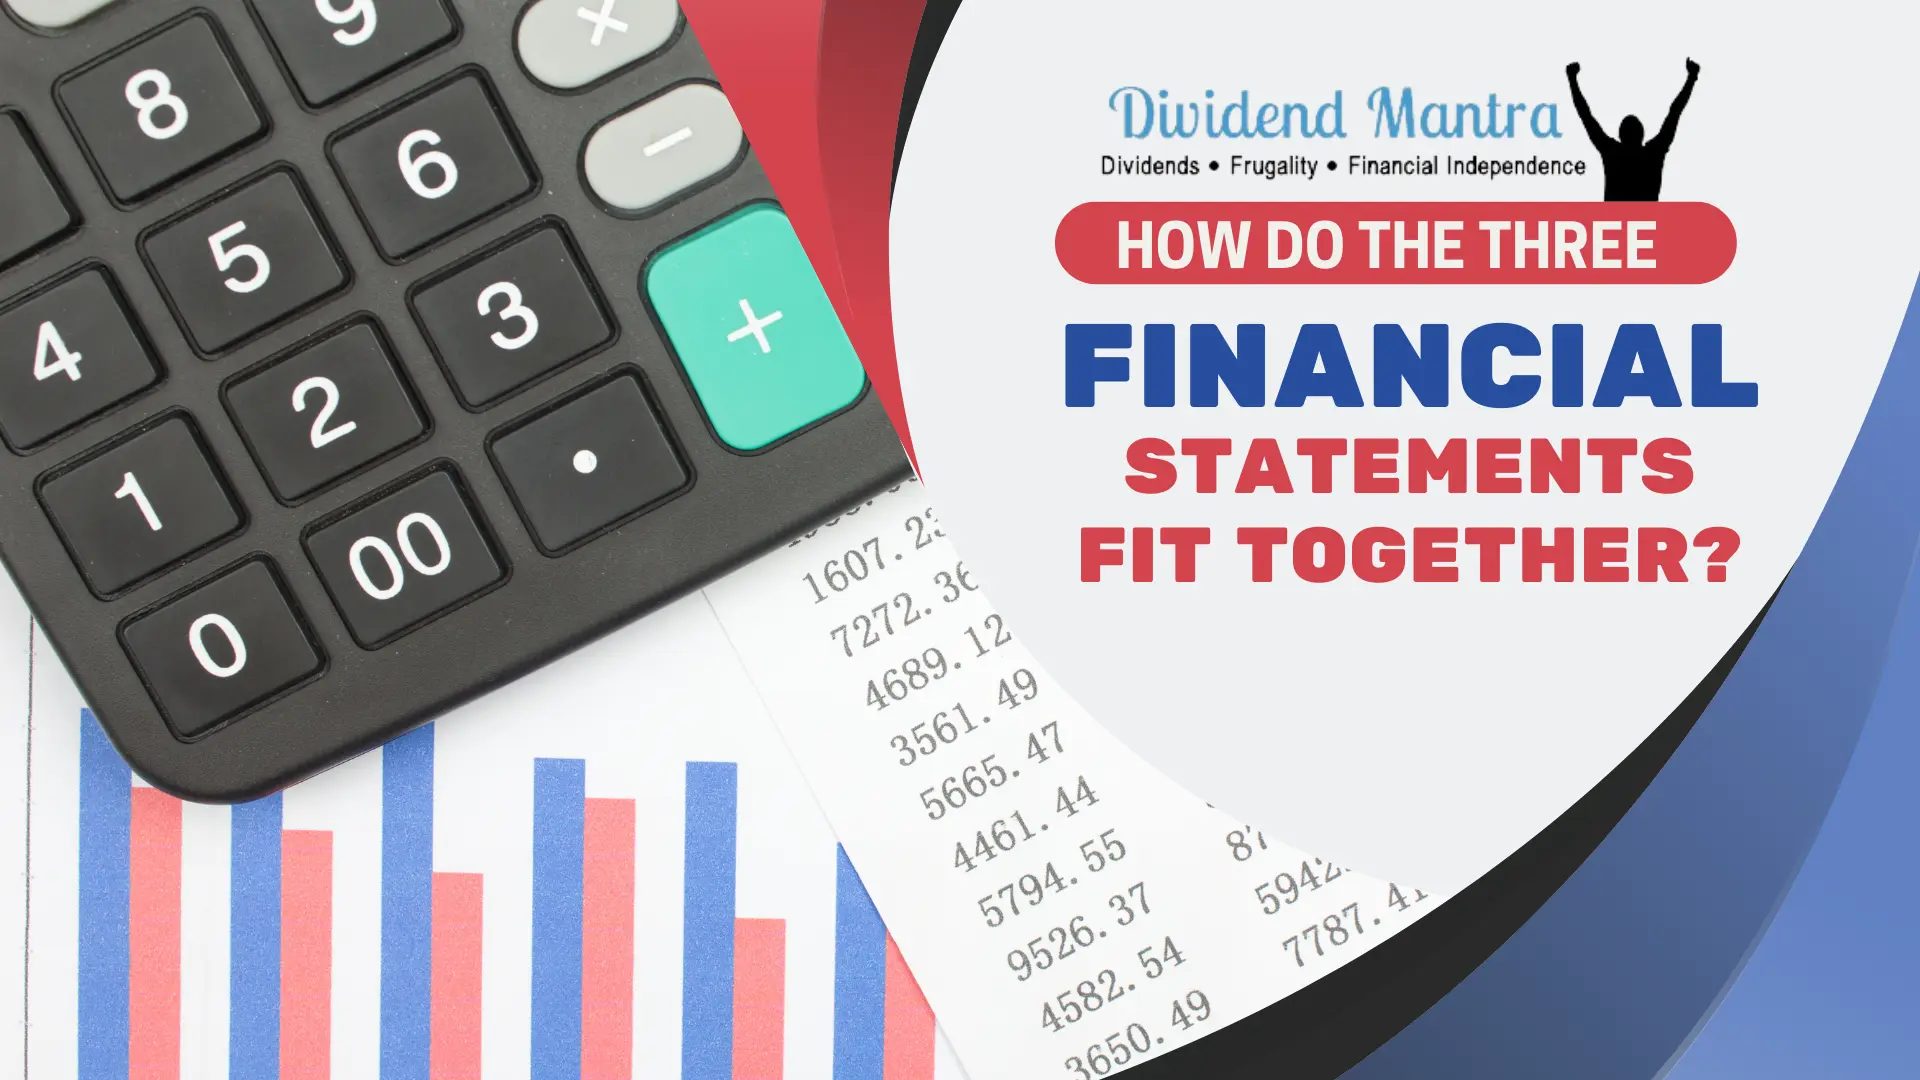 How Do the Three Financial Statements Fit Together